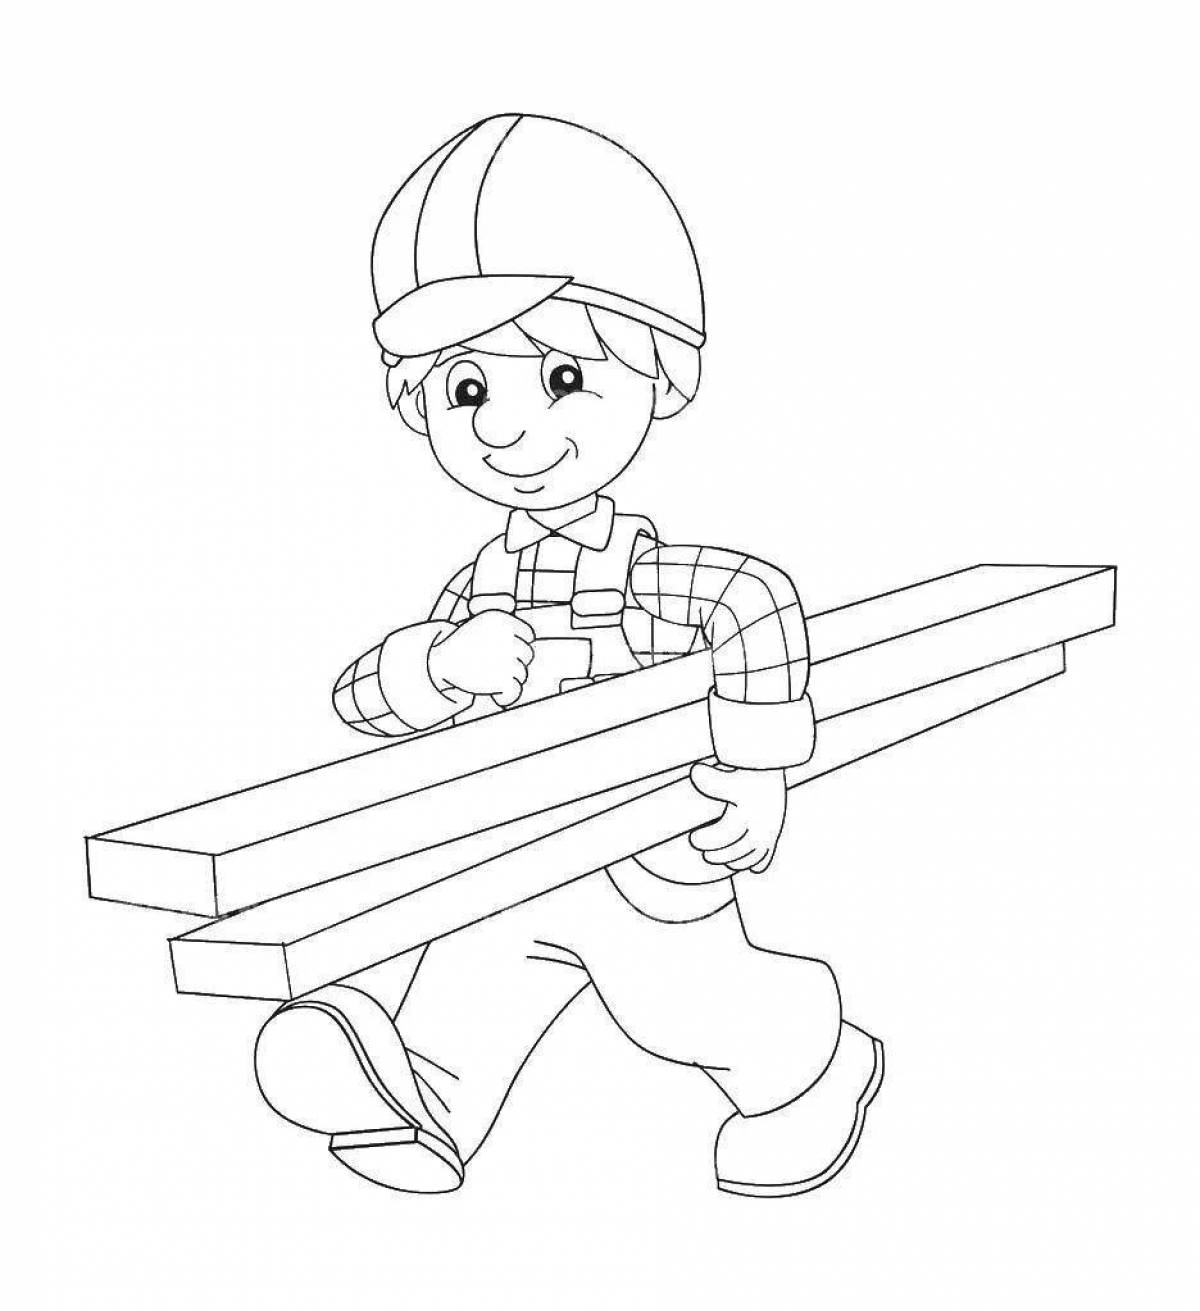 Coloring book funny carpenter for kids